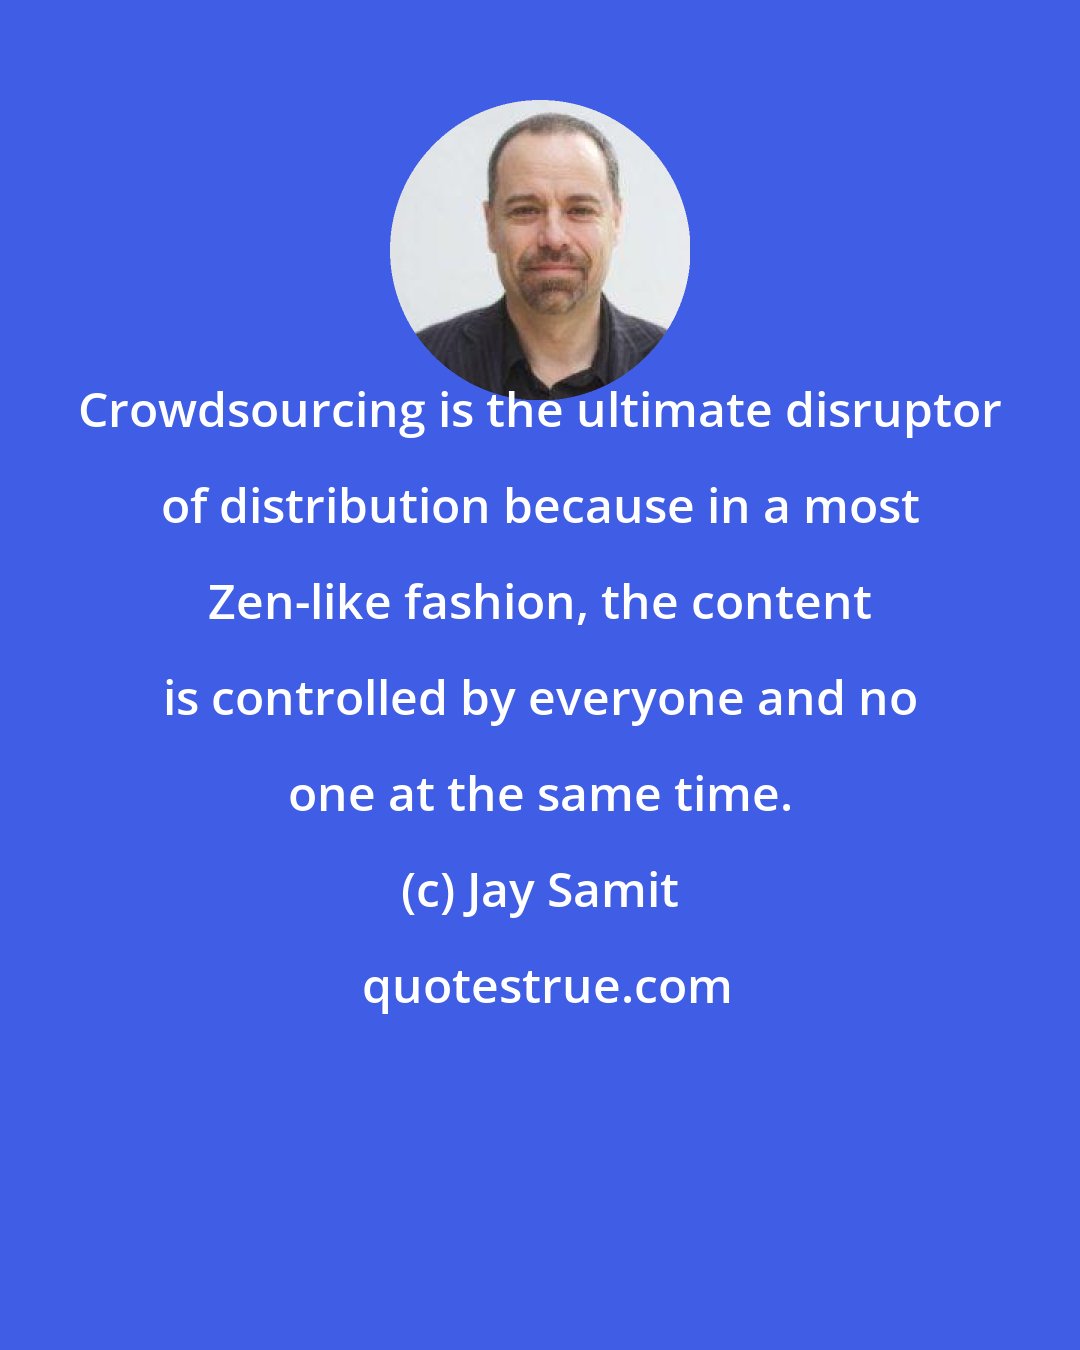 Jay Samit: Crowdsourcing is the ultimate disruptor of distribution because in a most Zen-like fashion, the content is controlled by everyone and no one at the same time.